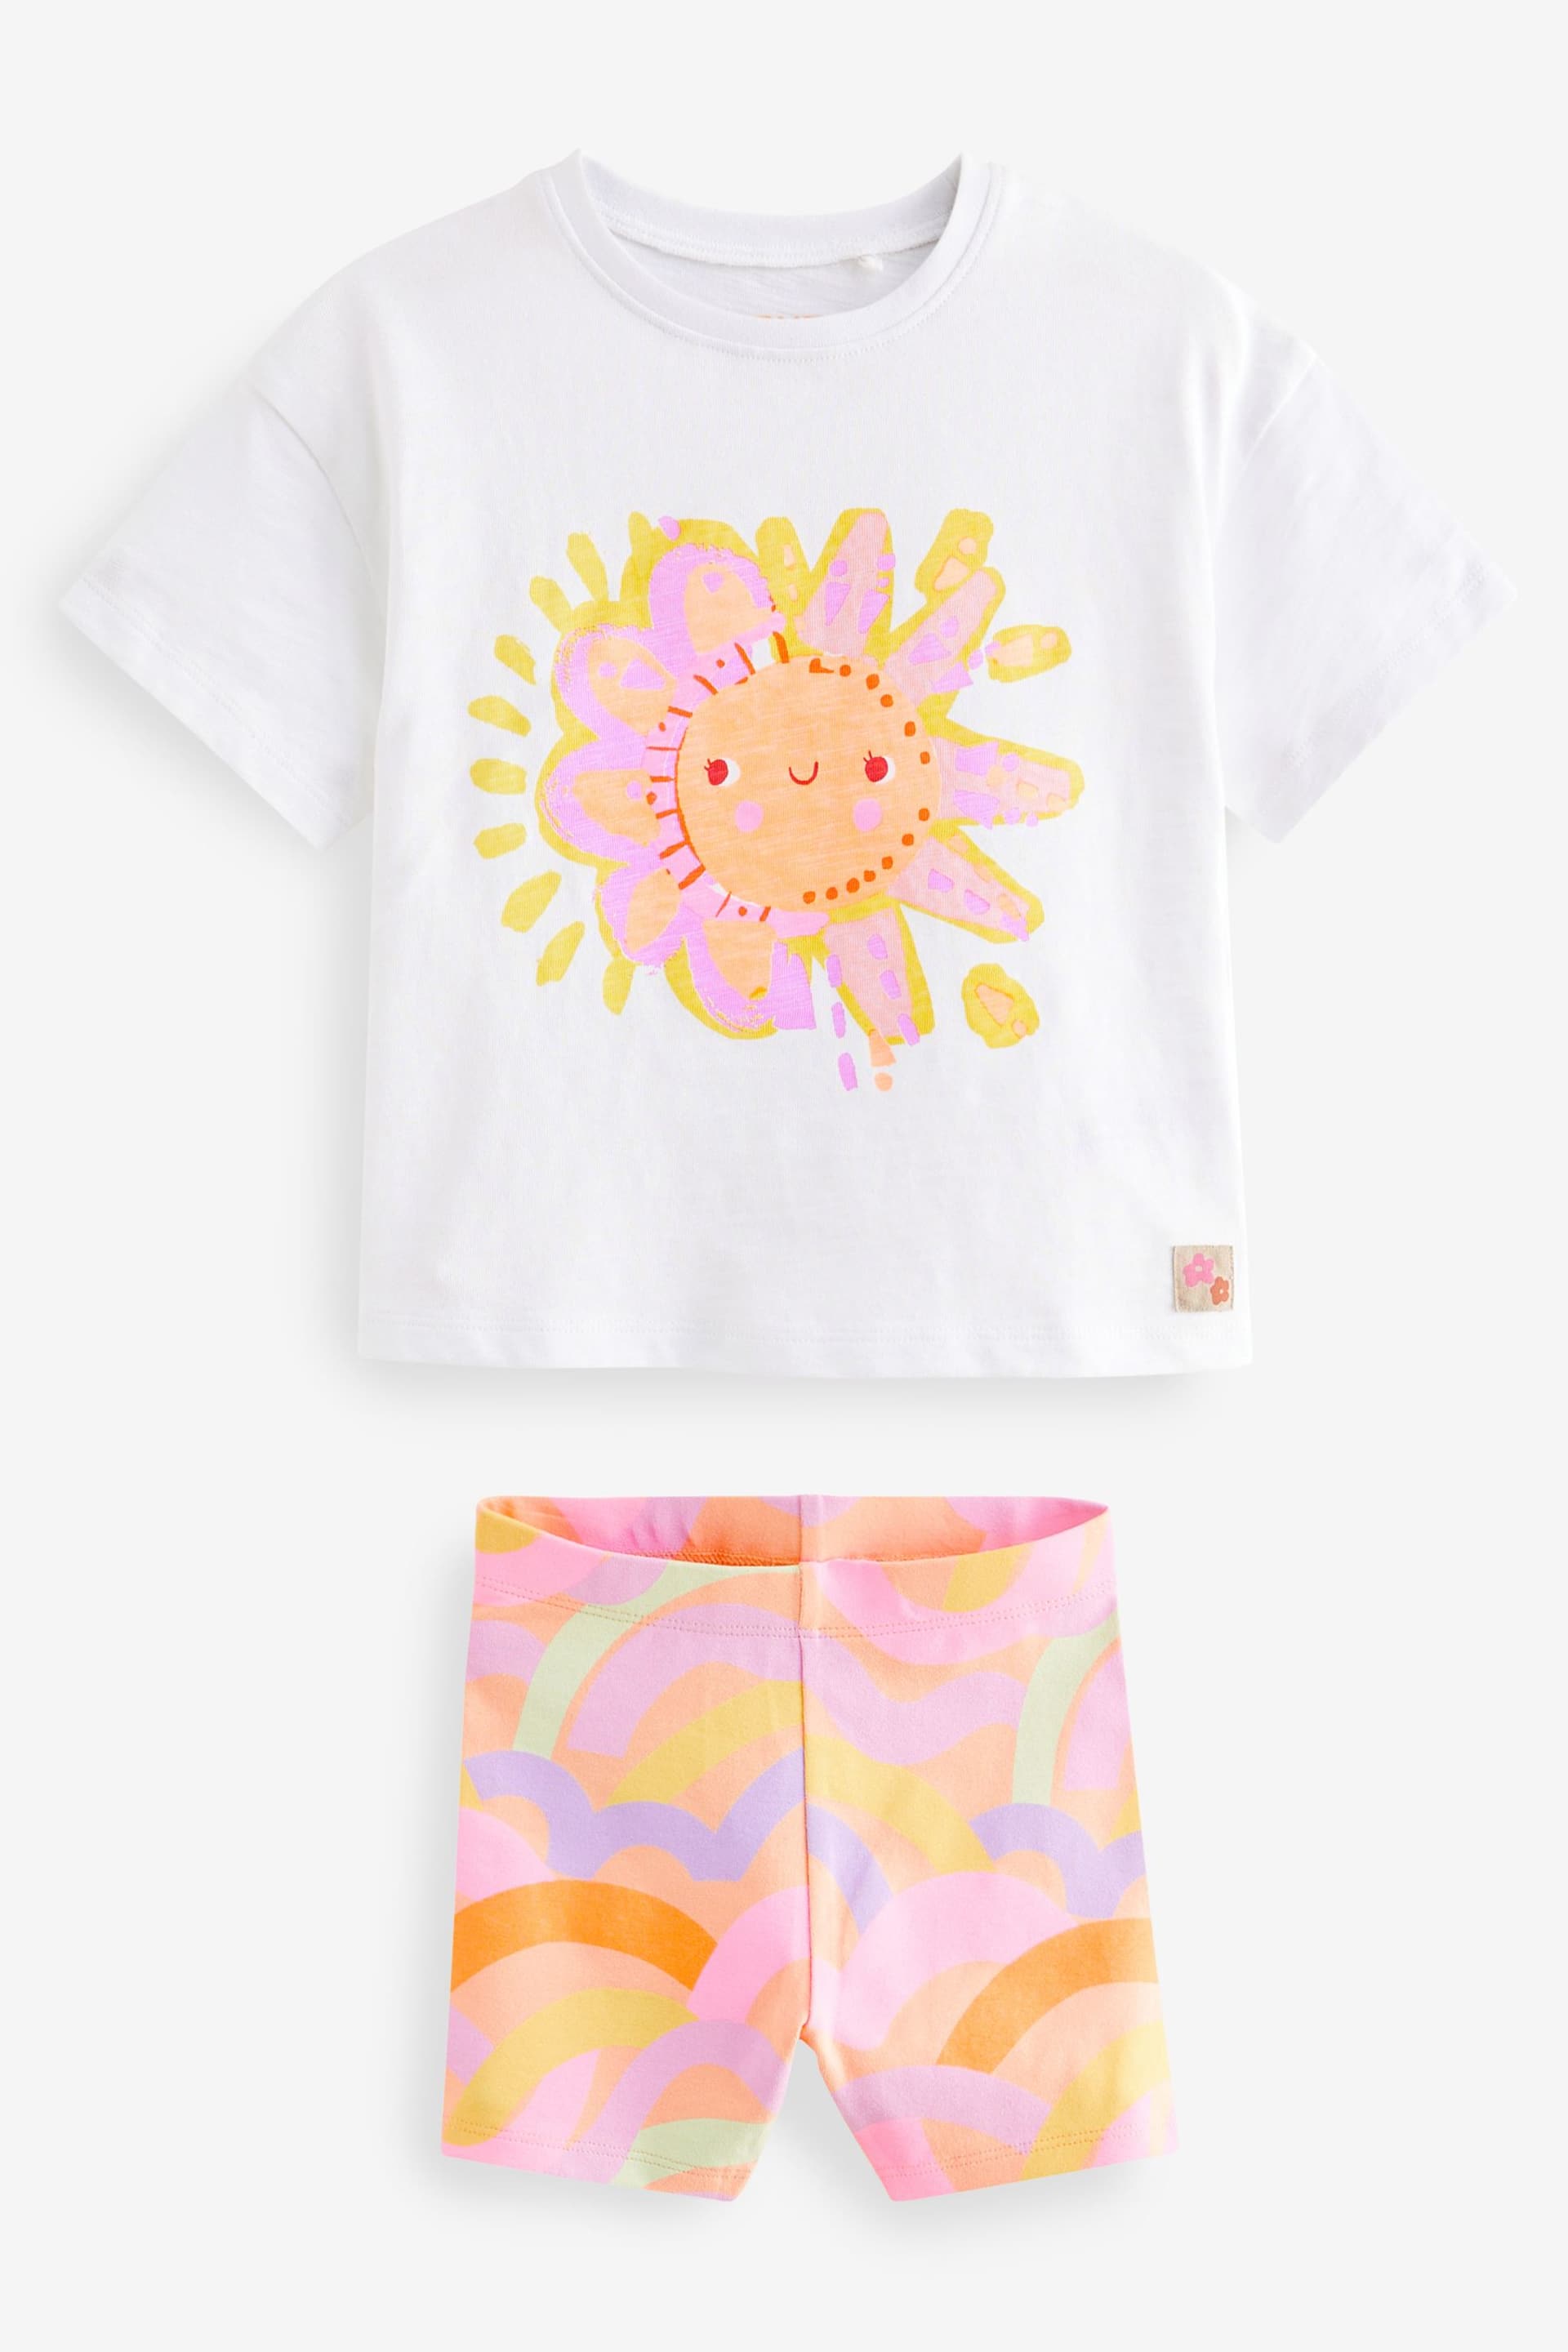 Pink/White Rainbow Sun Short Sleeve Top and Shorts Set (3mths-7yrs) - Image 5 of 7